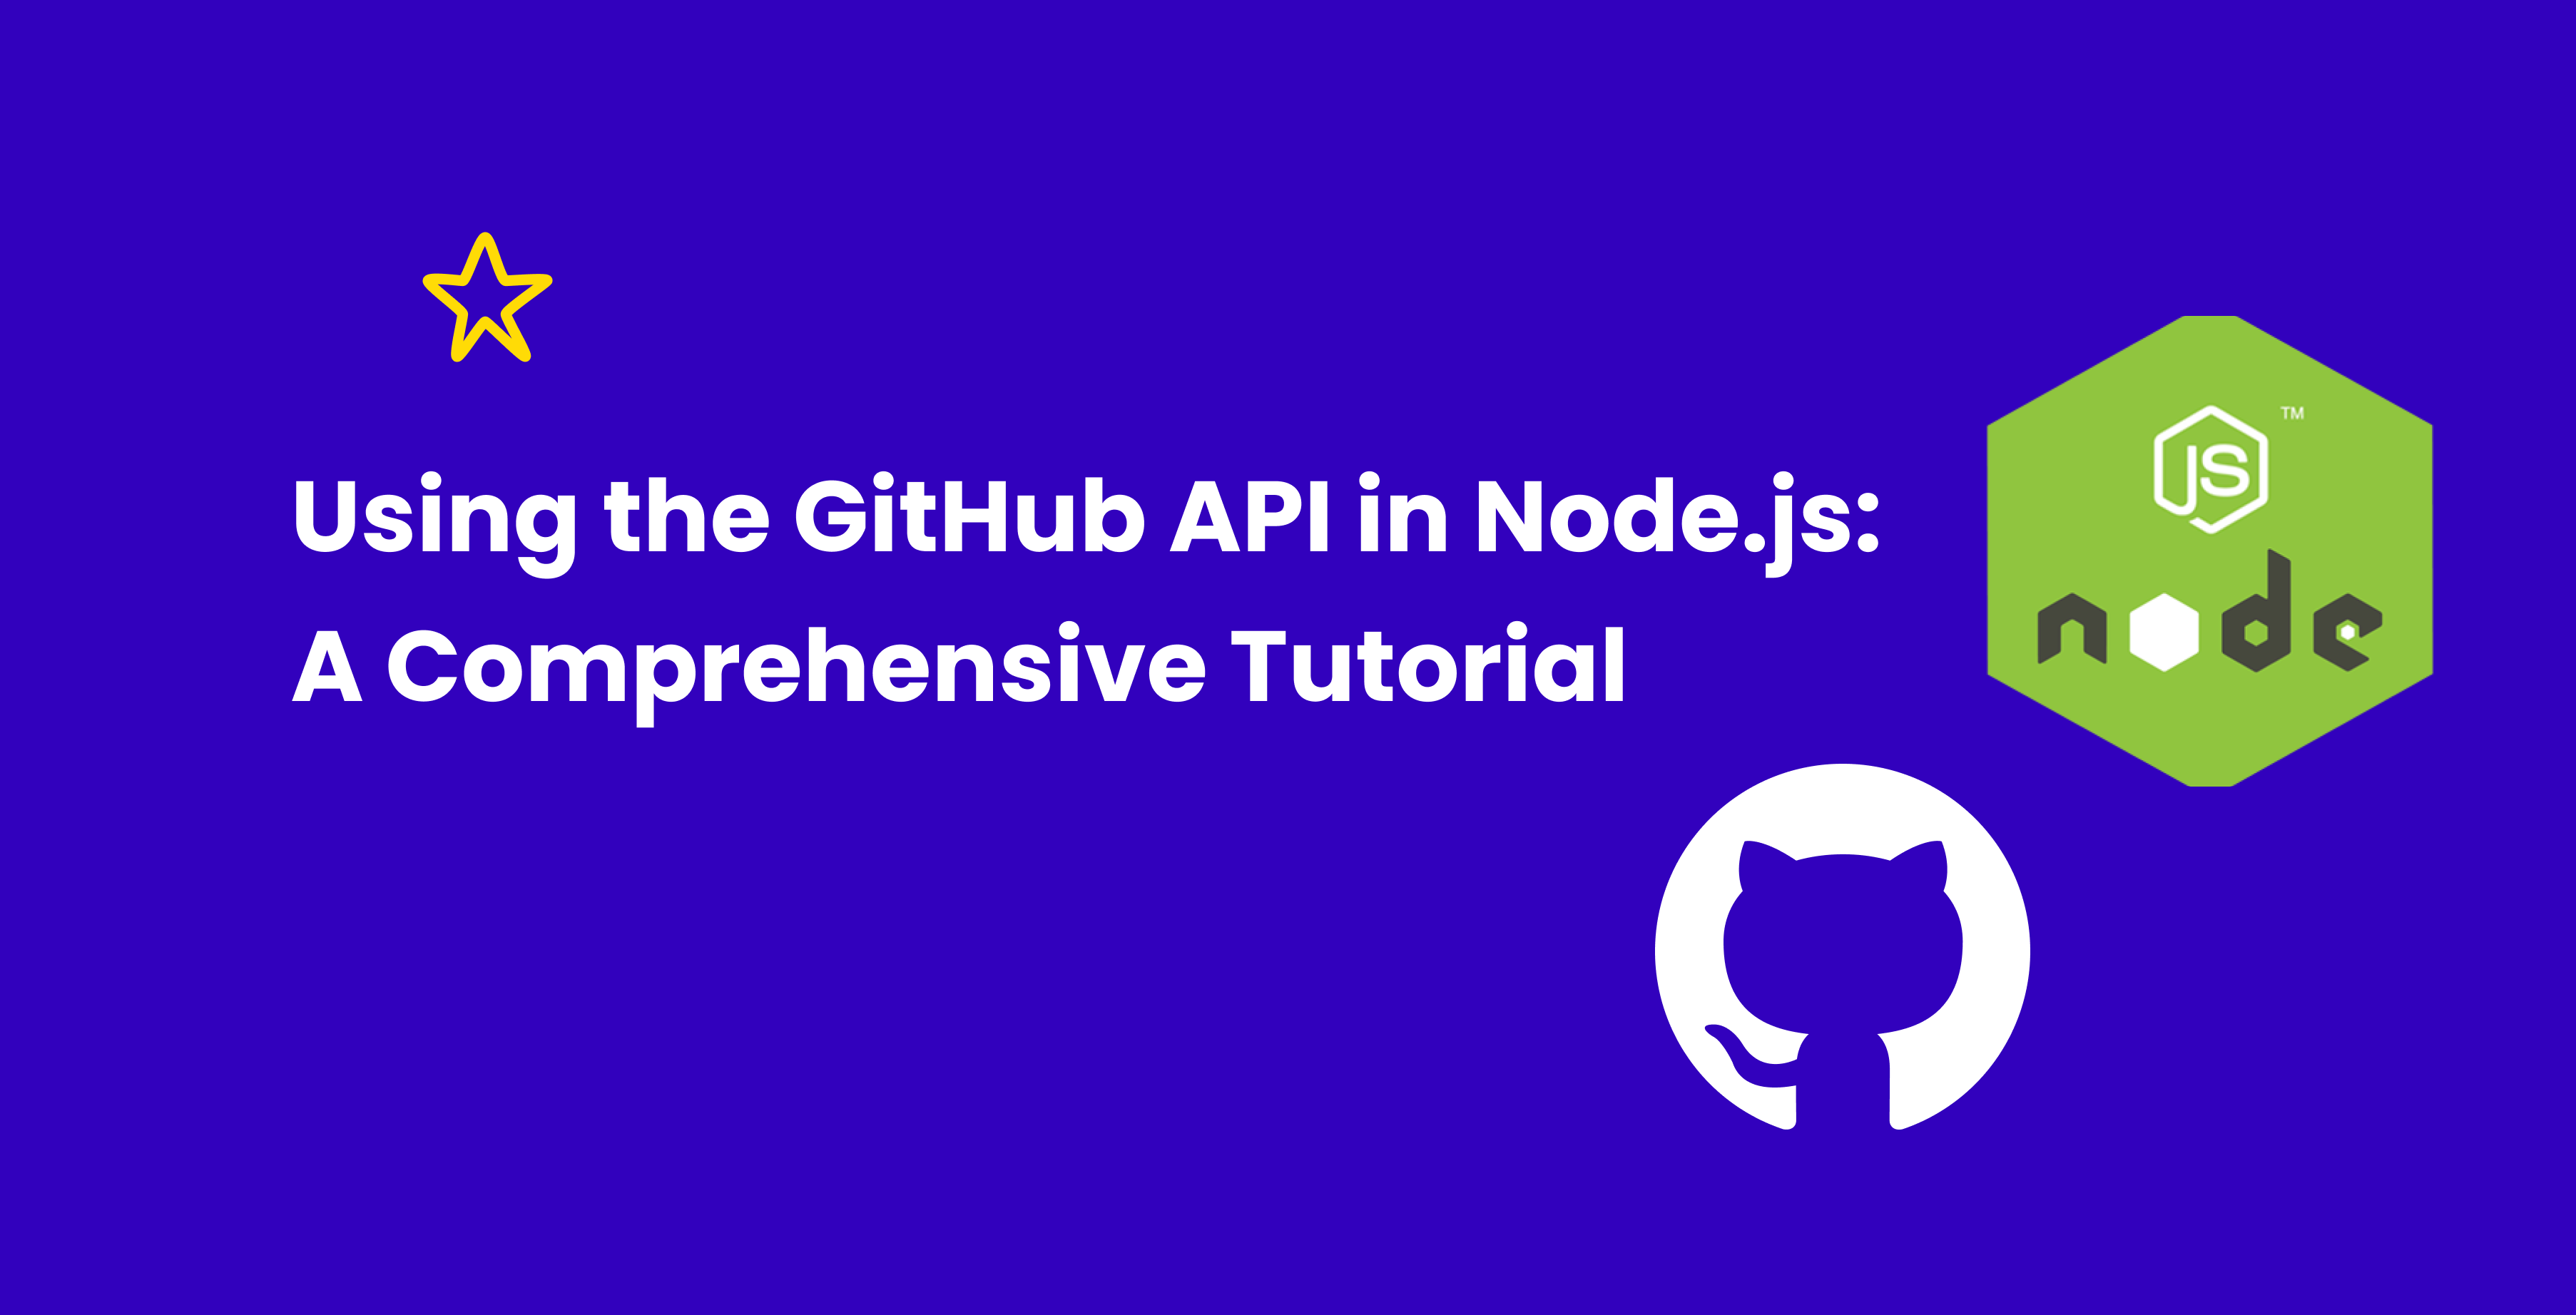 Using the GitHub API in Node.js: A Comprehensive Tutorial